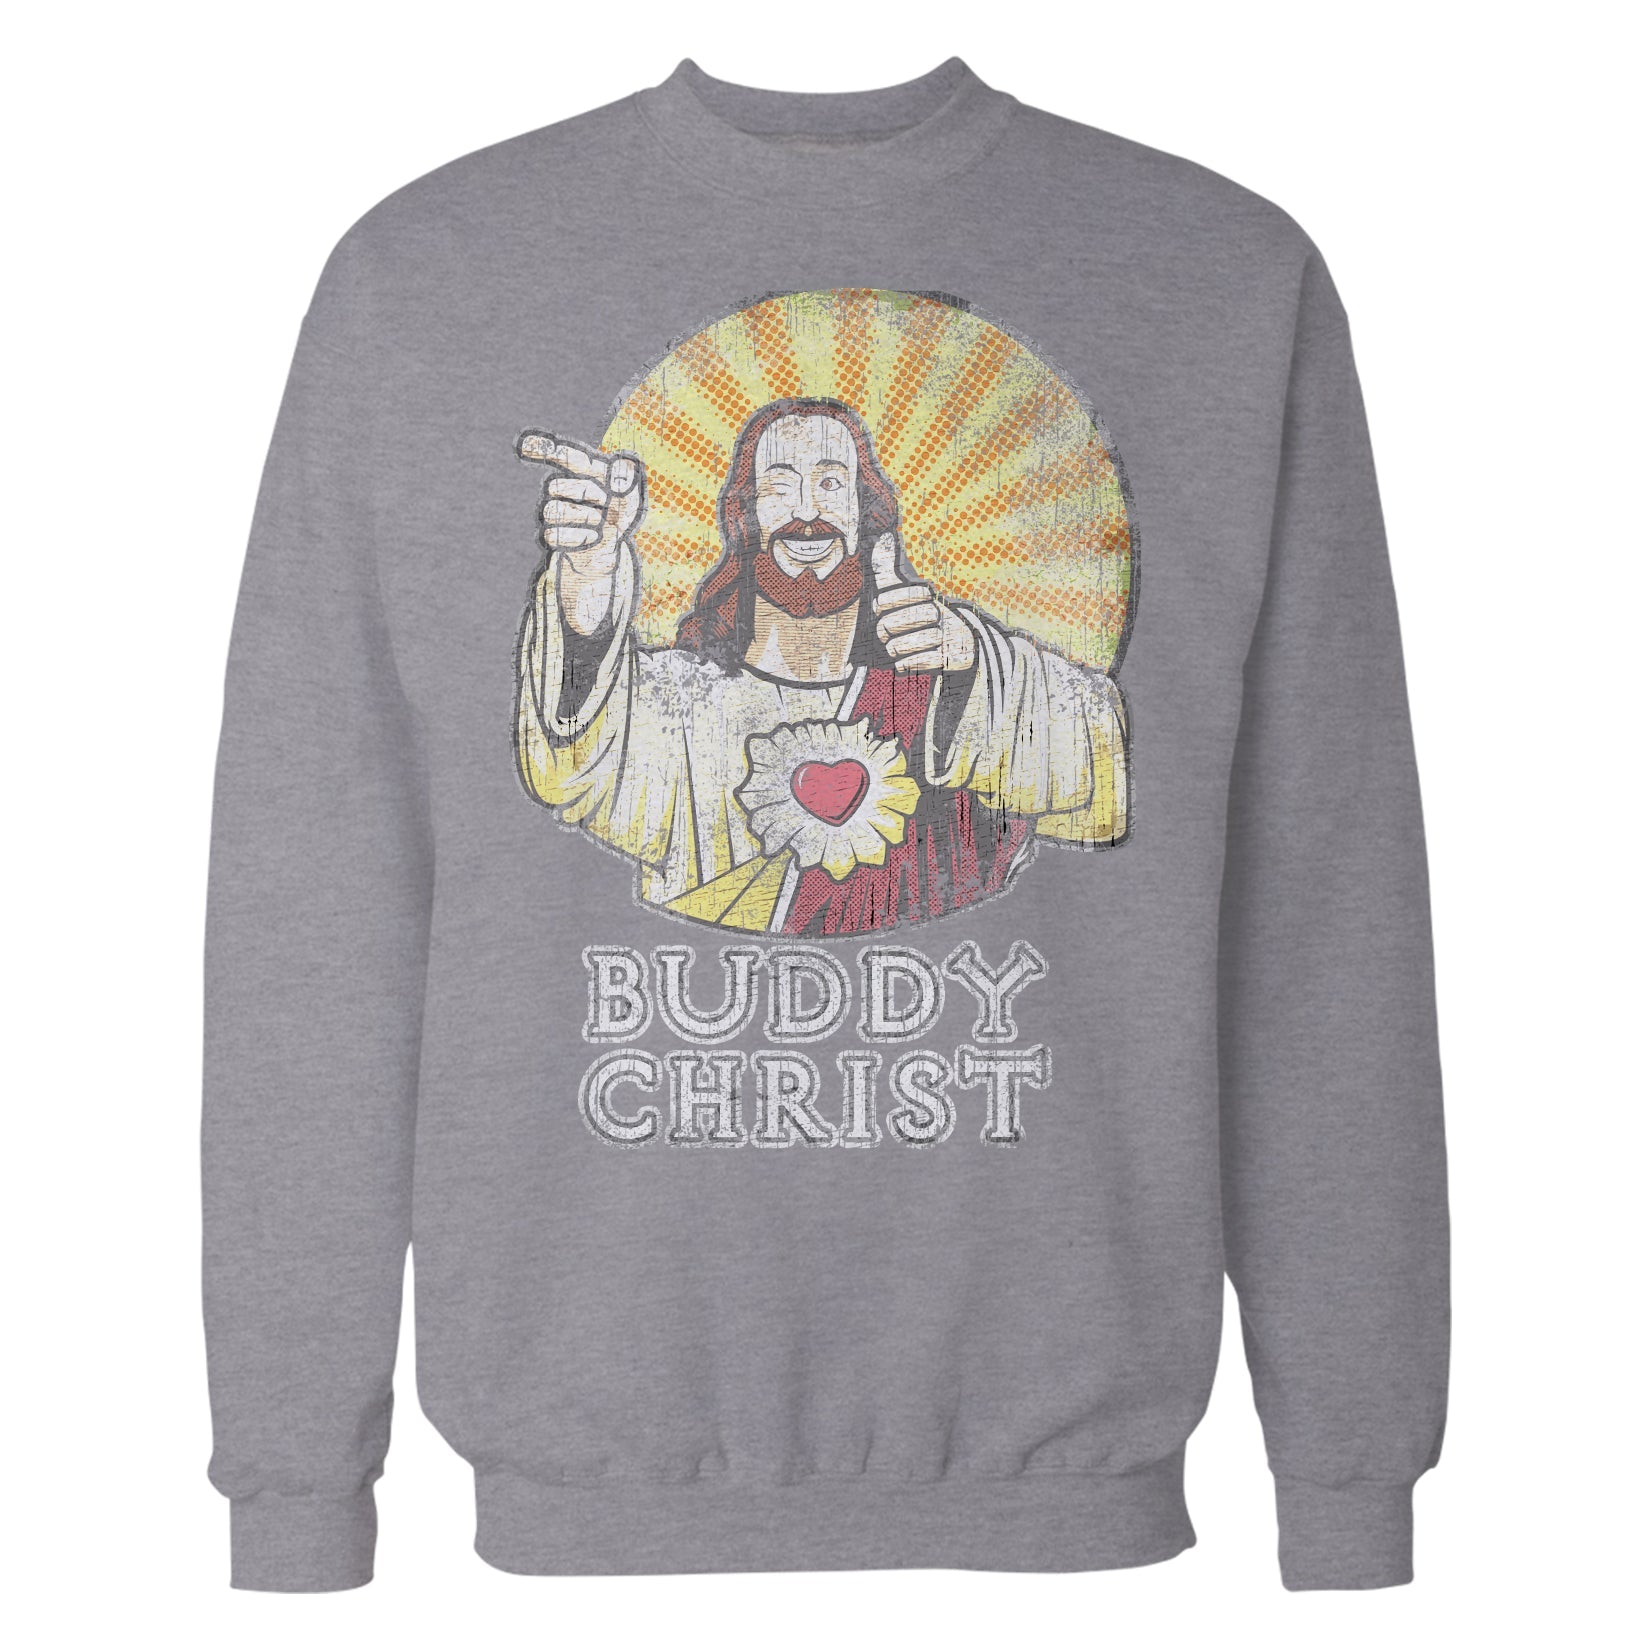 Kevin Smith View Askewniverse Buddy Christ Got Summer Vintage Variant Official Sweatshirt